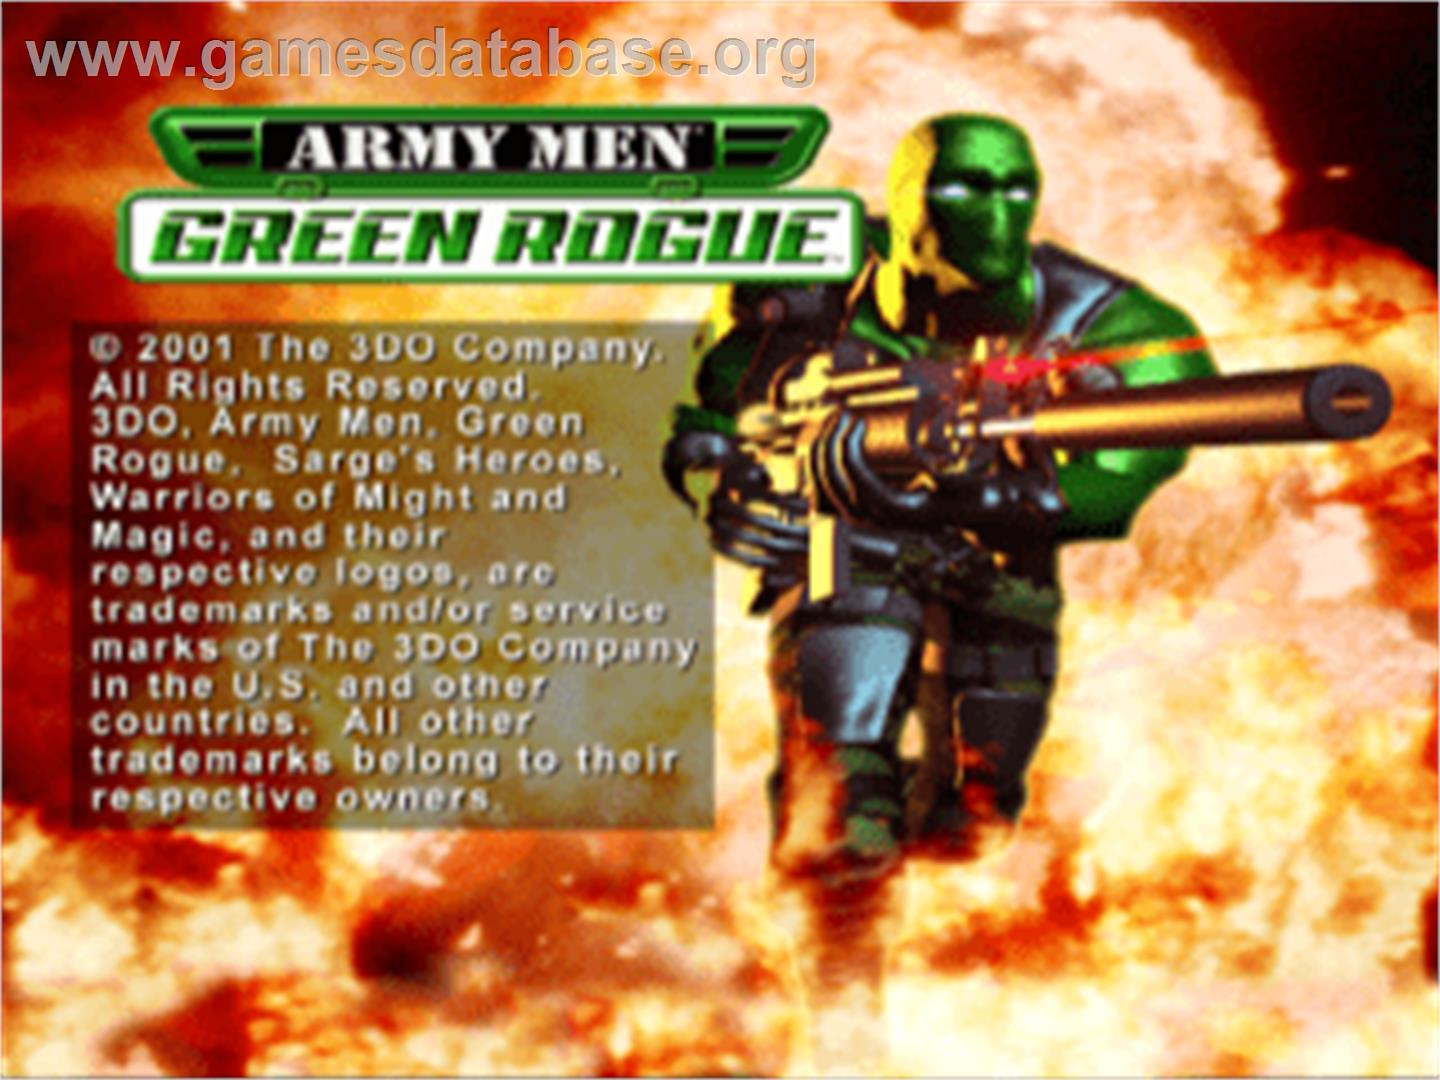 Army Men: Green Rogue - Sony Playstation - Artwork - Title Screen